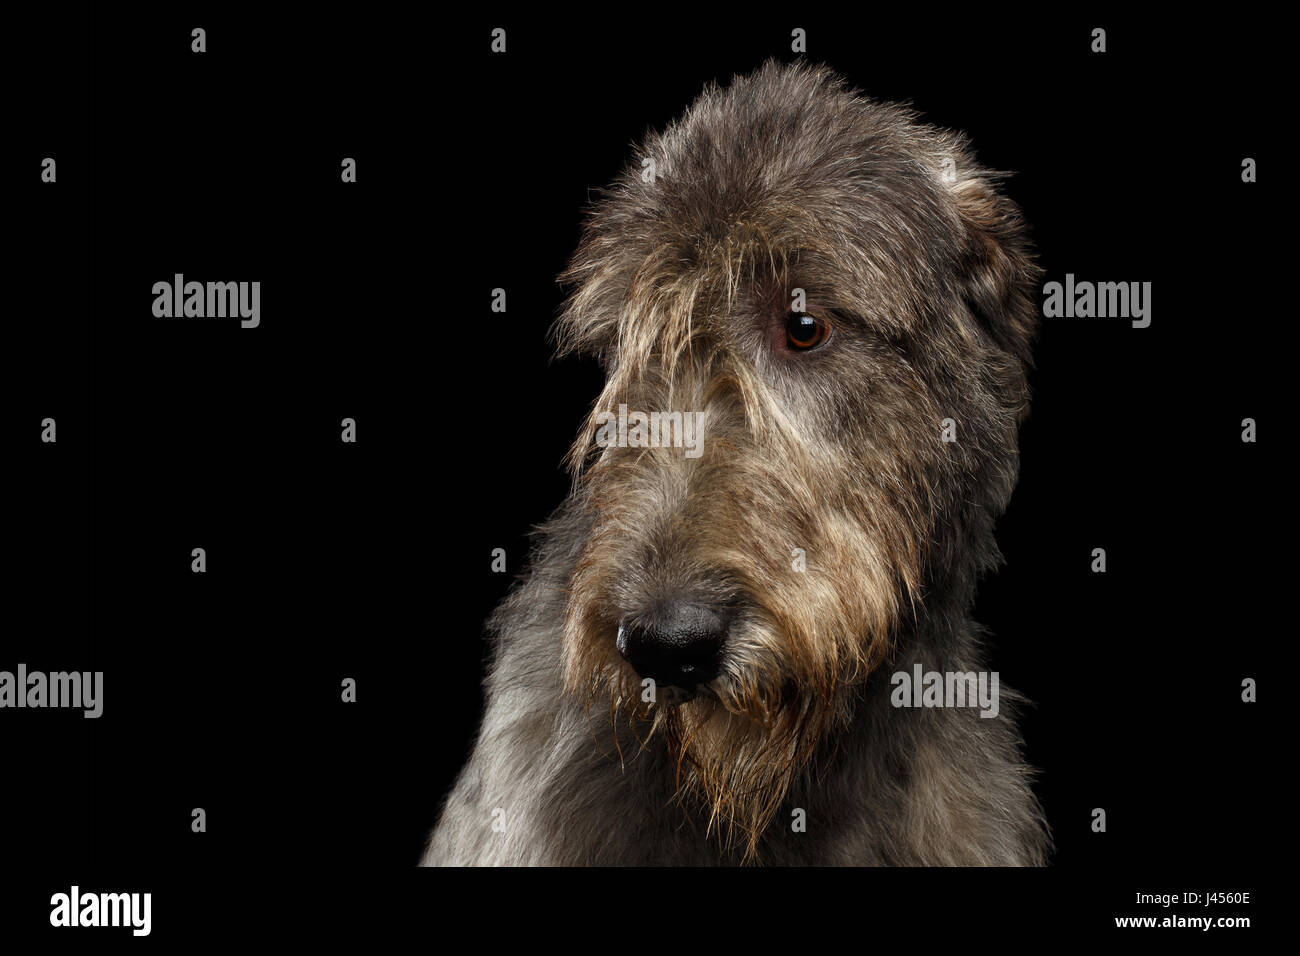 Portrait of Irish Wolfhound Dog Looking at side on Isolated Black Background, profile view Stock Photo